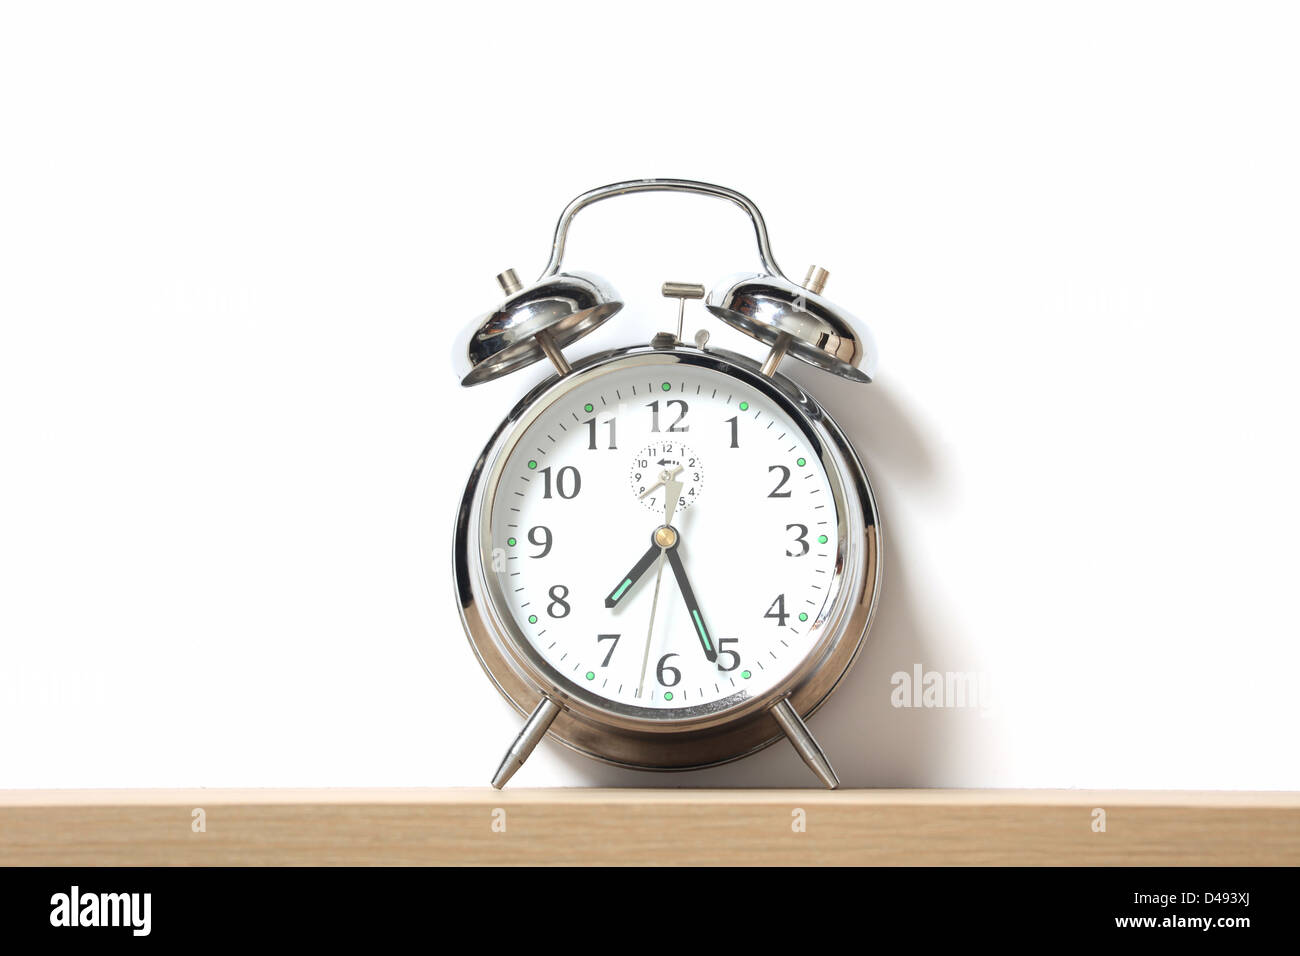 Chrome alarm clock with bells on, set just after 7-25 Stock Photo - Alamy